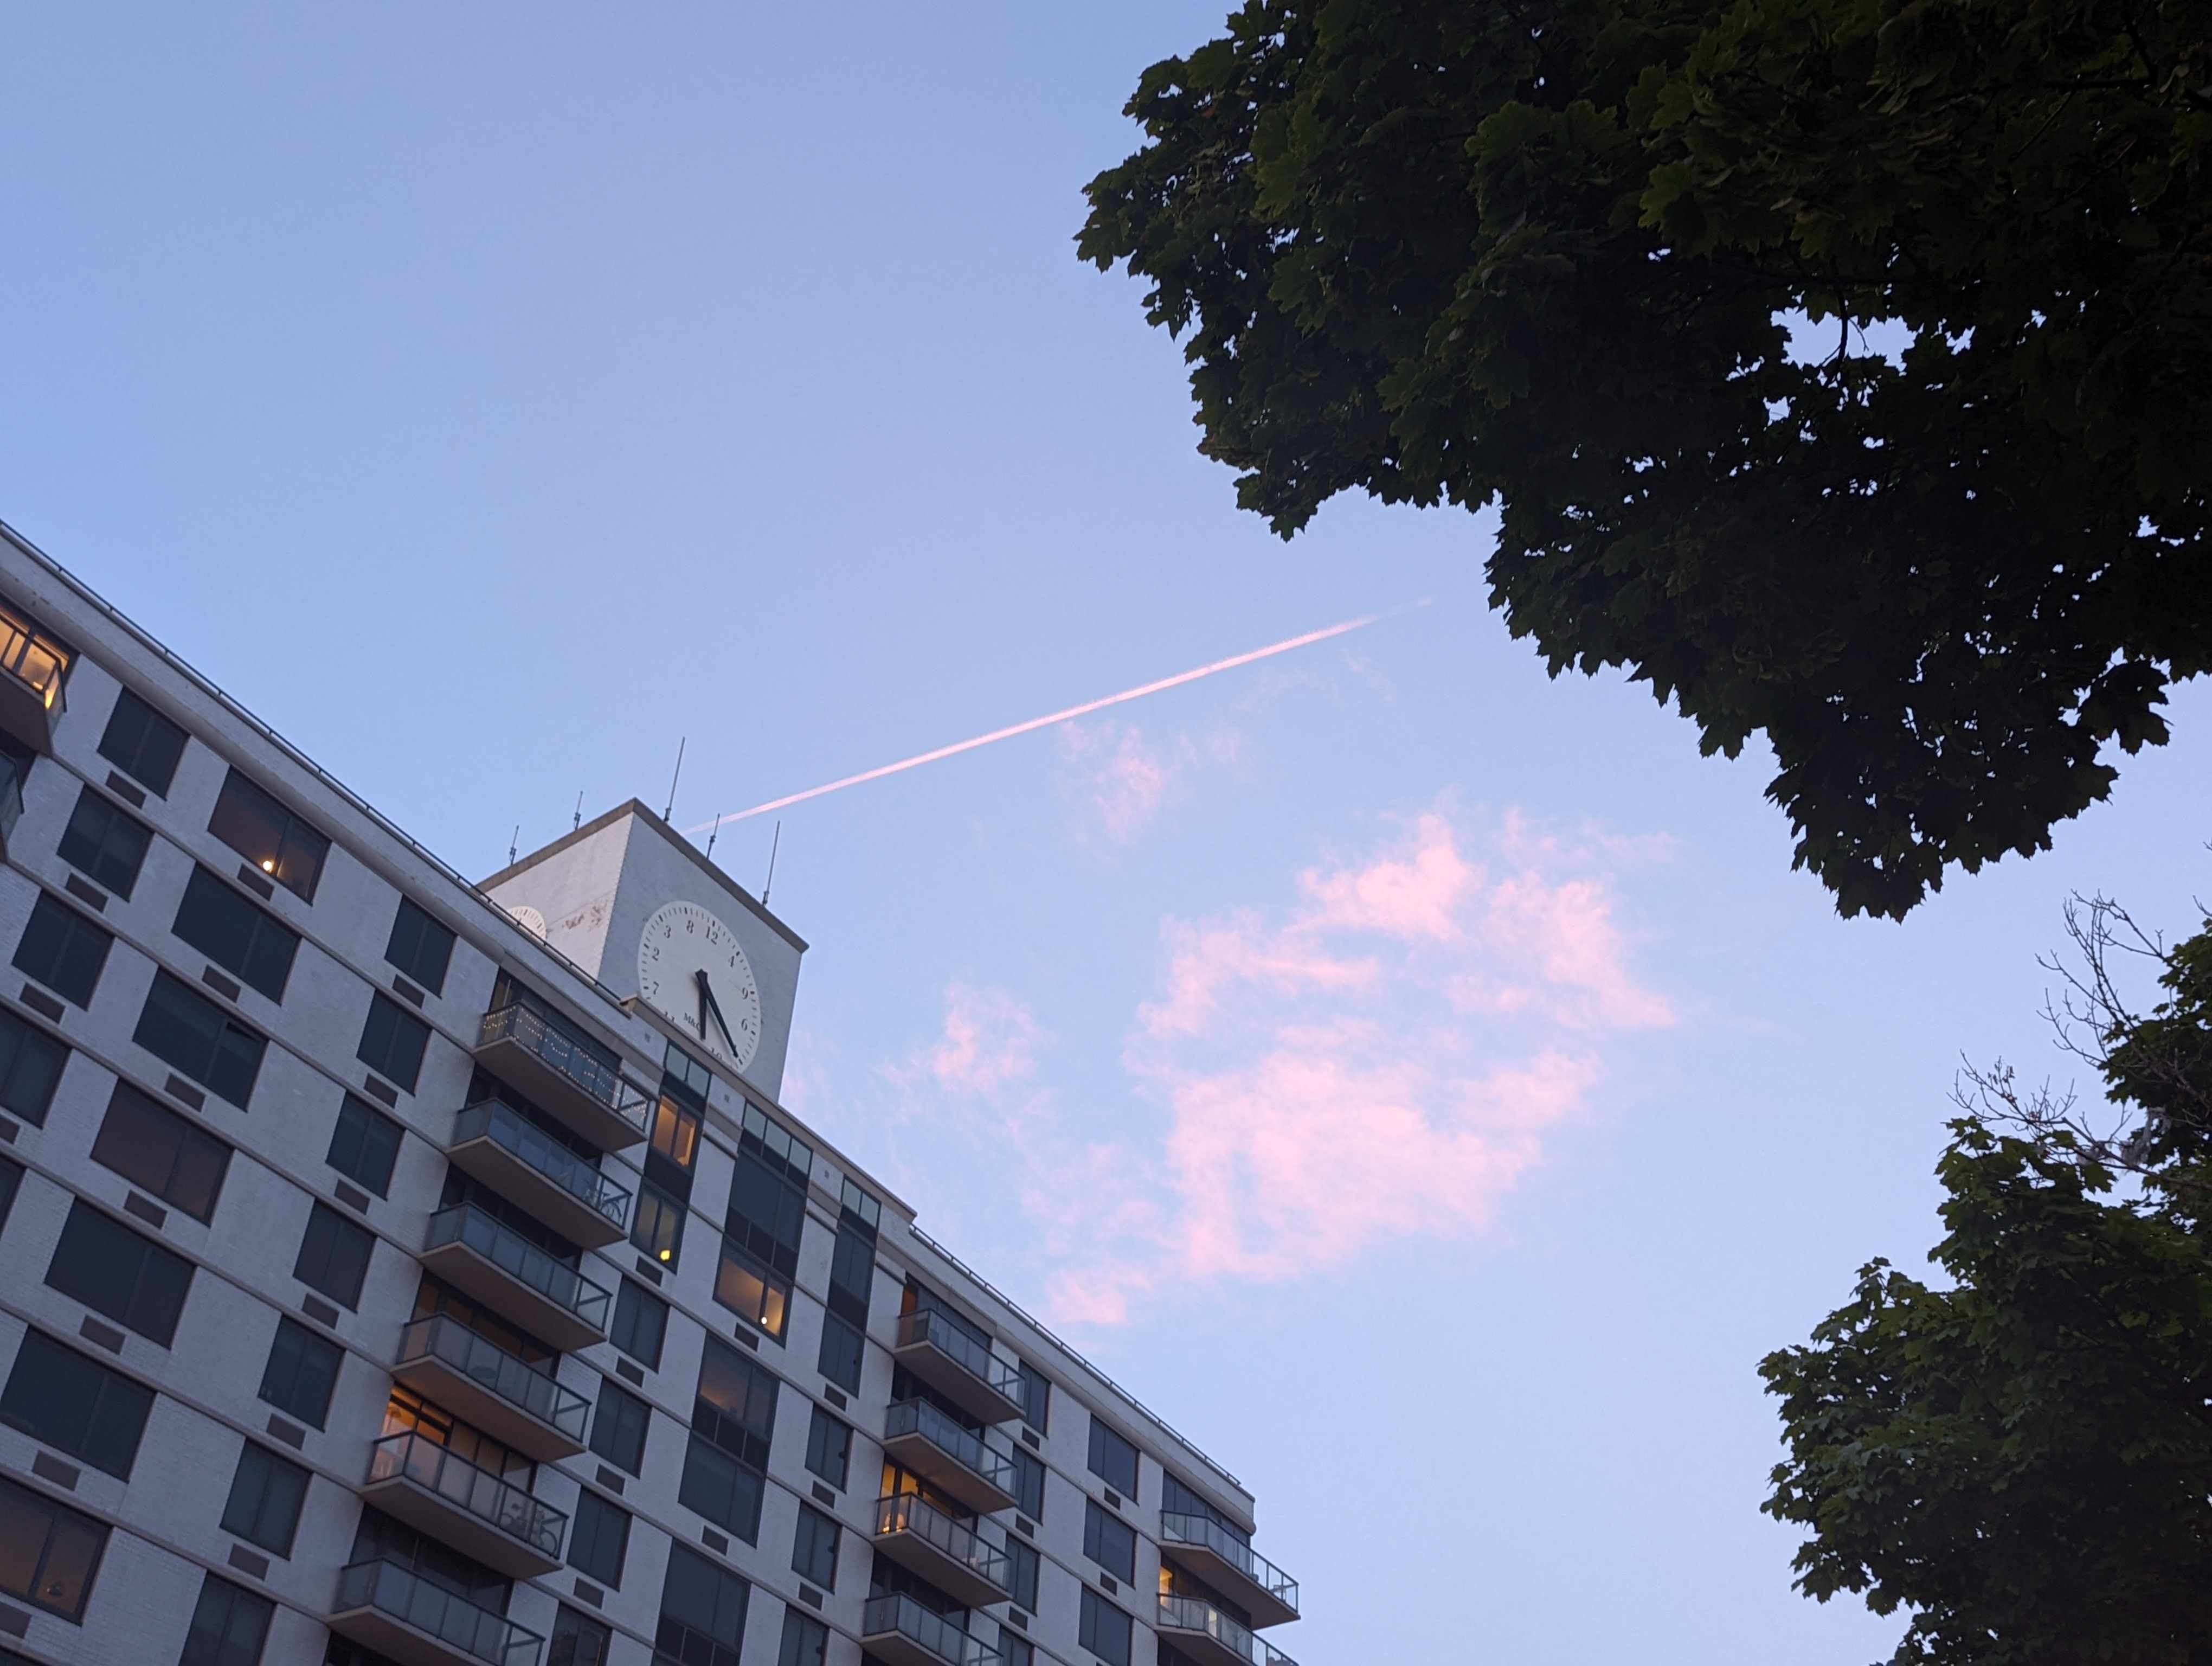 Photo of the sky, showing some pink clouds and a contrail, a building featuring a large clock, and foliage.